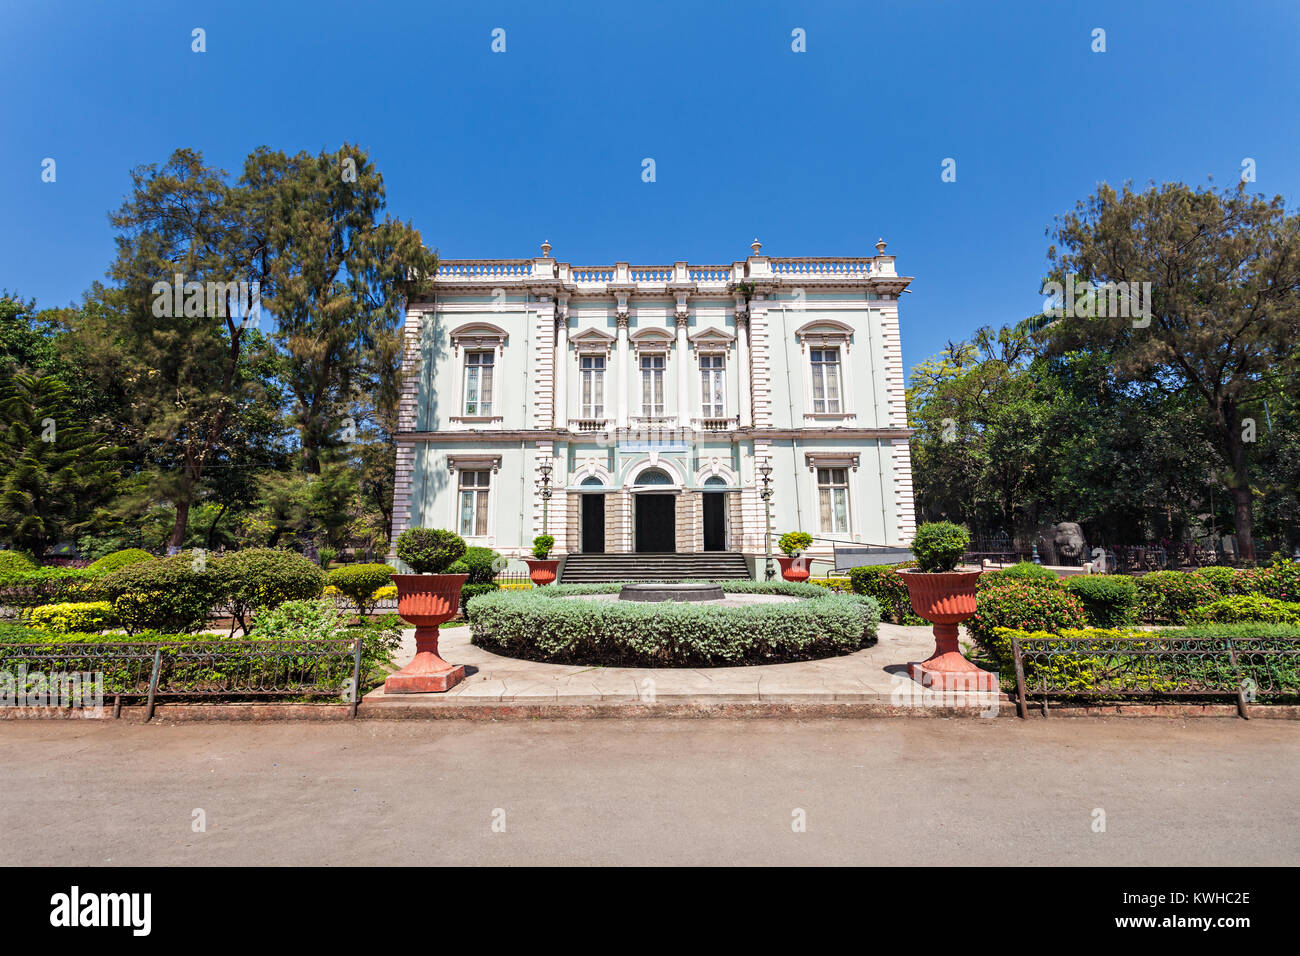 The Dr. Bhau Daji Lad Mumbai City Museum (formerly the Victoria and Albert Museum) is the oldest museum in Mumbai, India Stock Photo